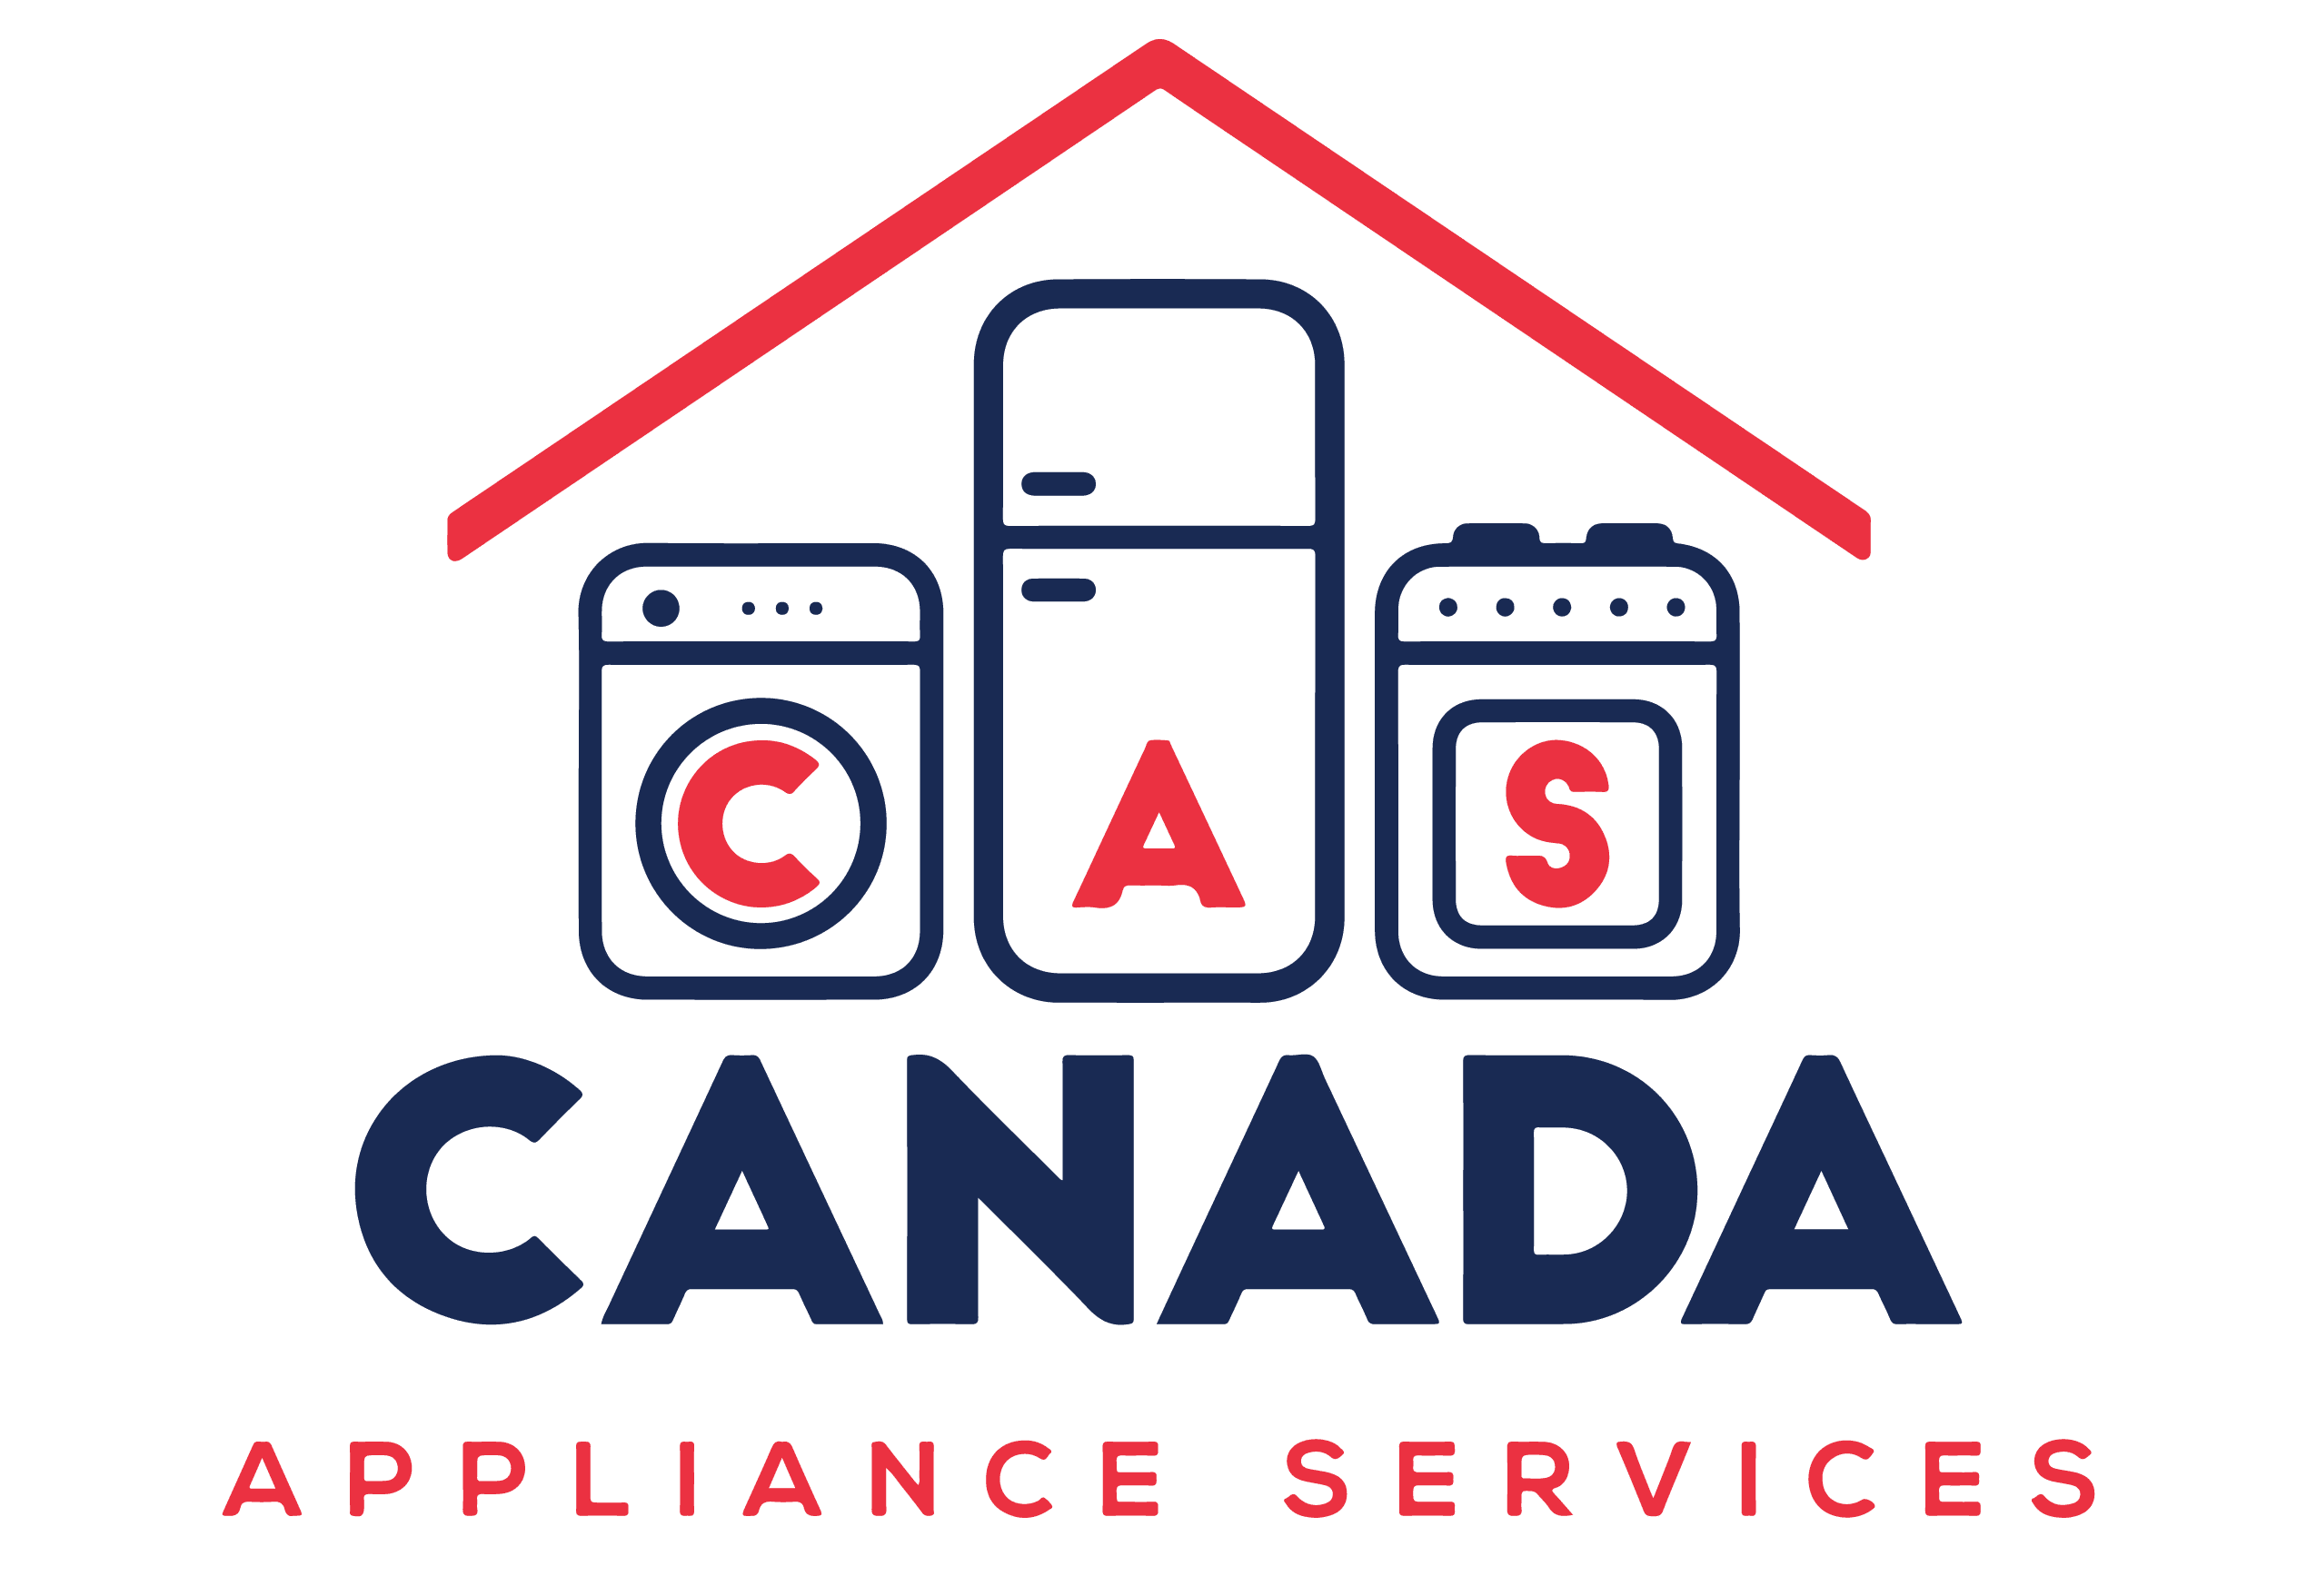 Canada Appliance Services